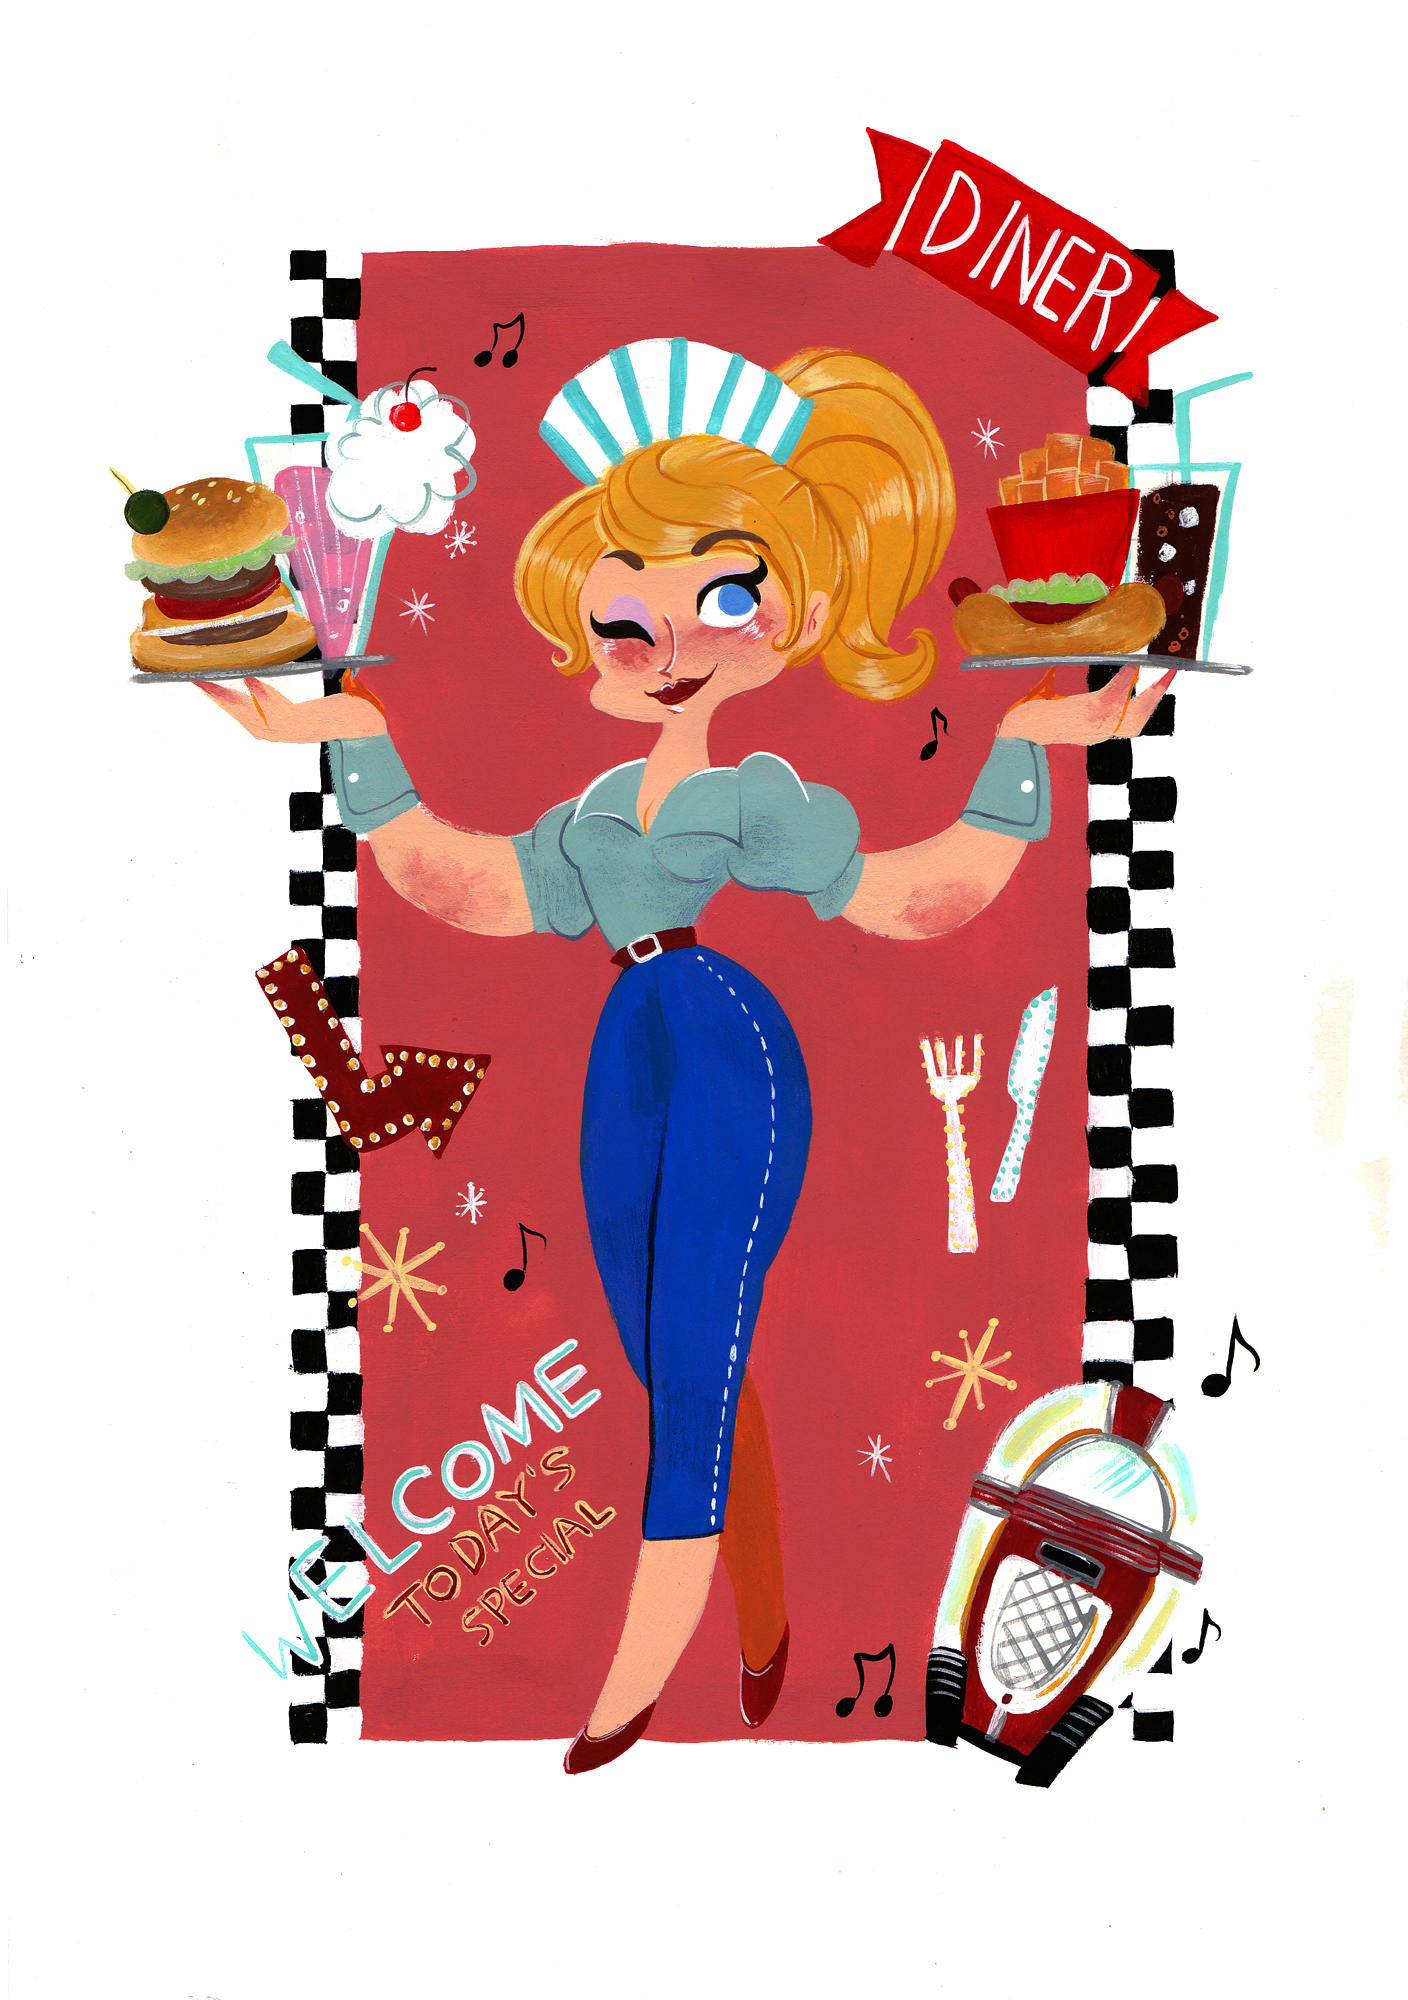 Welcome To Diner アート インテリア絵画の通販 販売サイト Thisisgallery ディスイズギャラリー